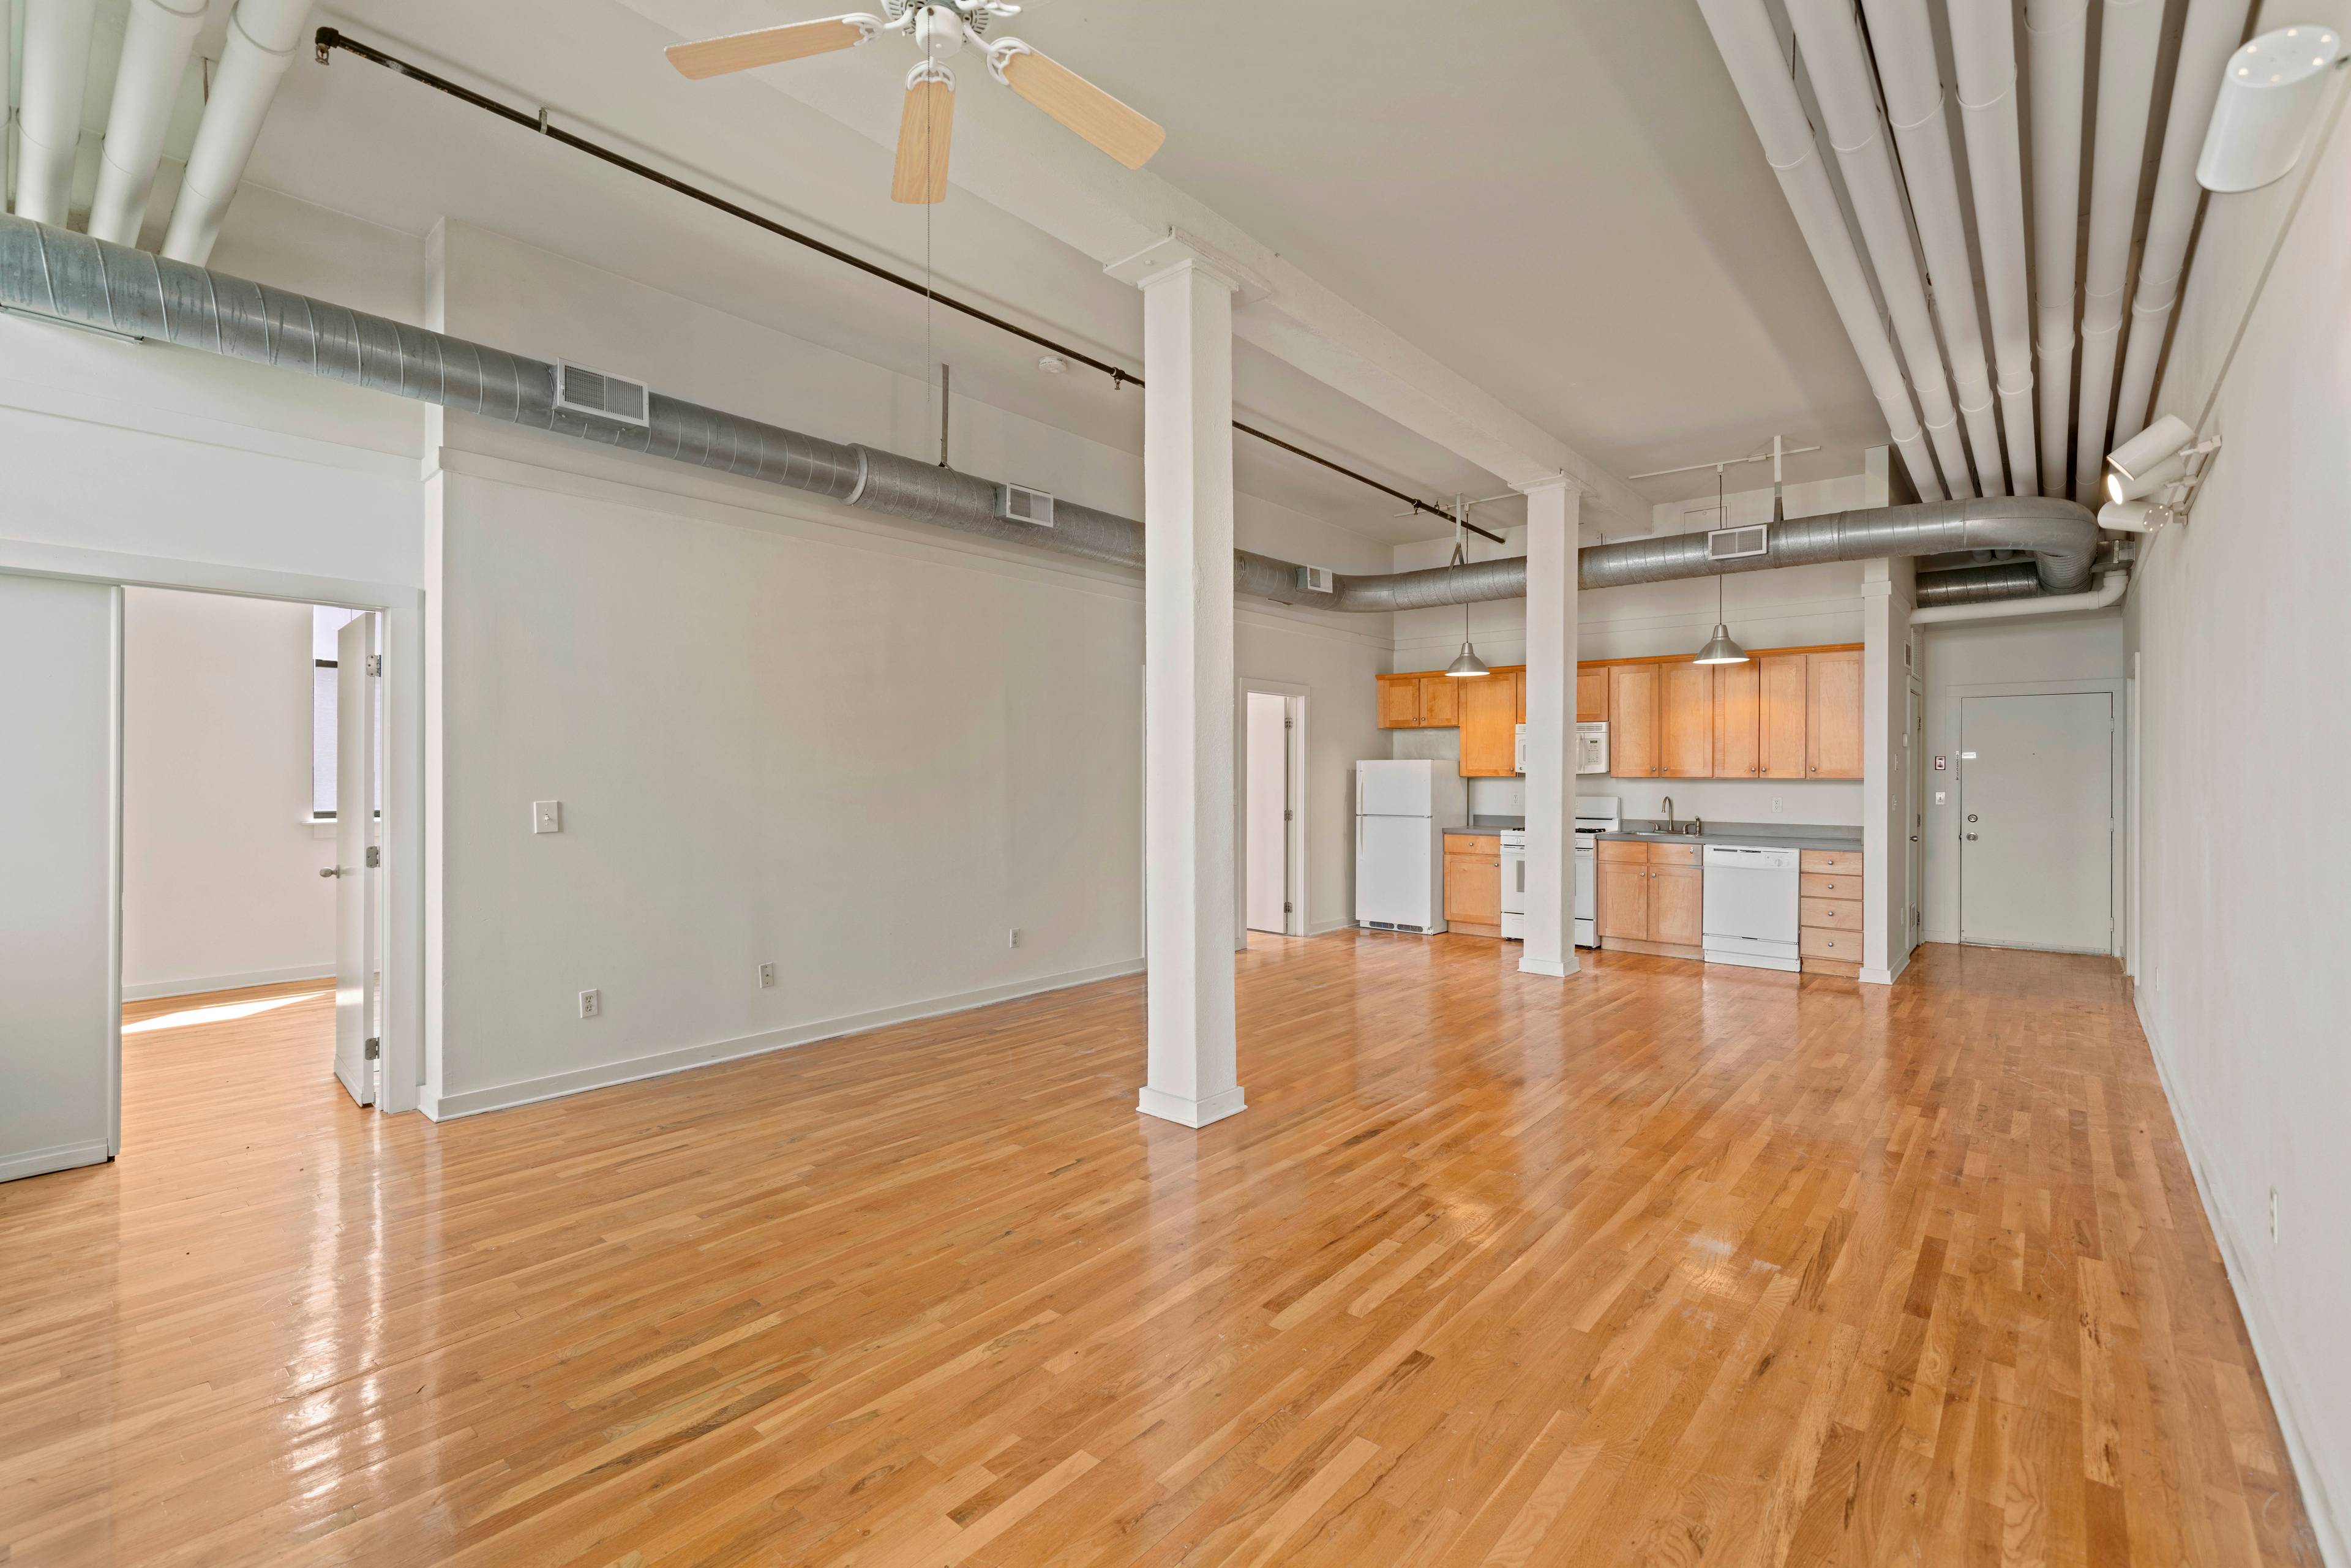 Large Open 3 Bedroom Loft located in Hoboken NJ with Soaring High Ceilings, Lots of Natural Light. King Size bedrooms!  Laundry and Elevator on Site